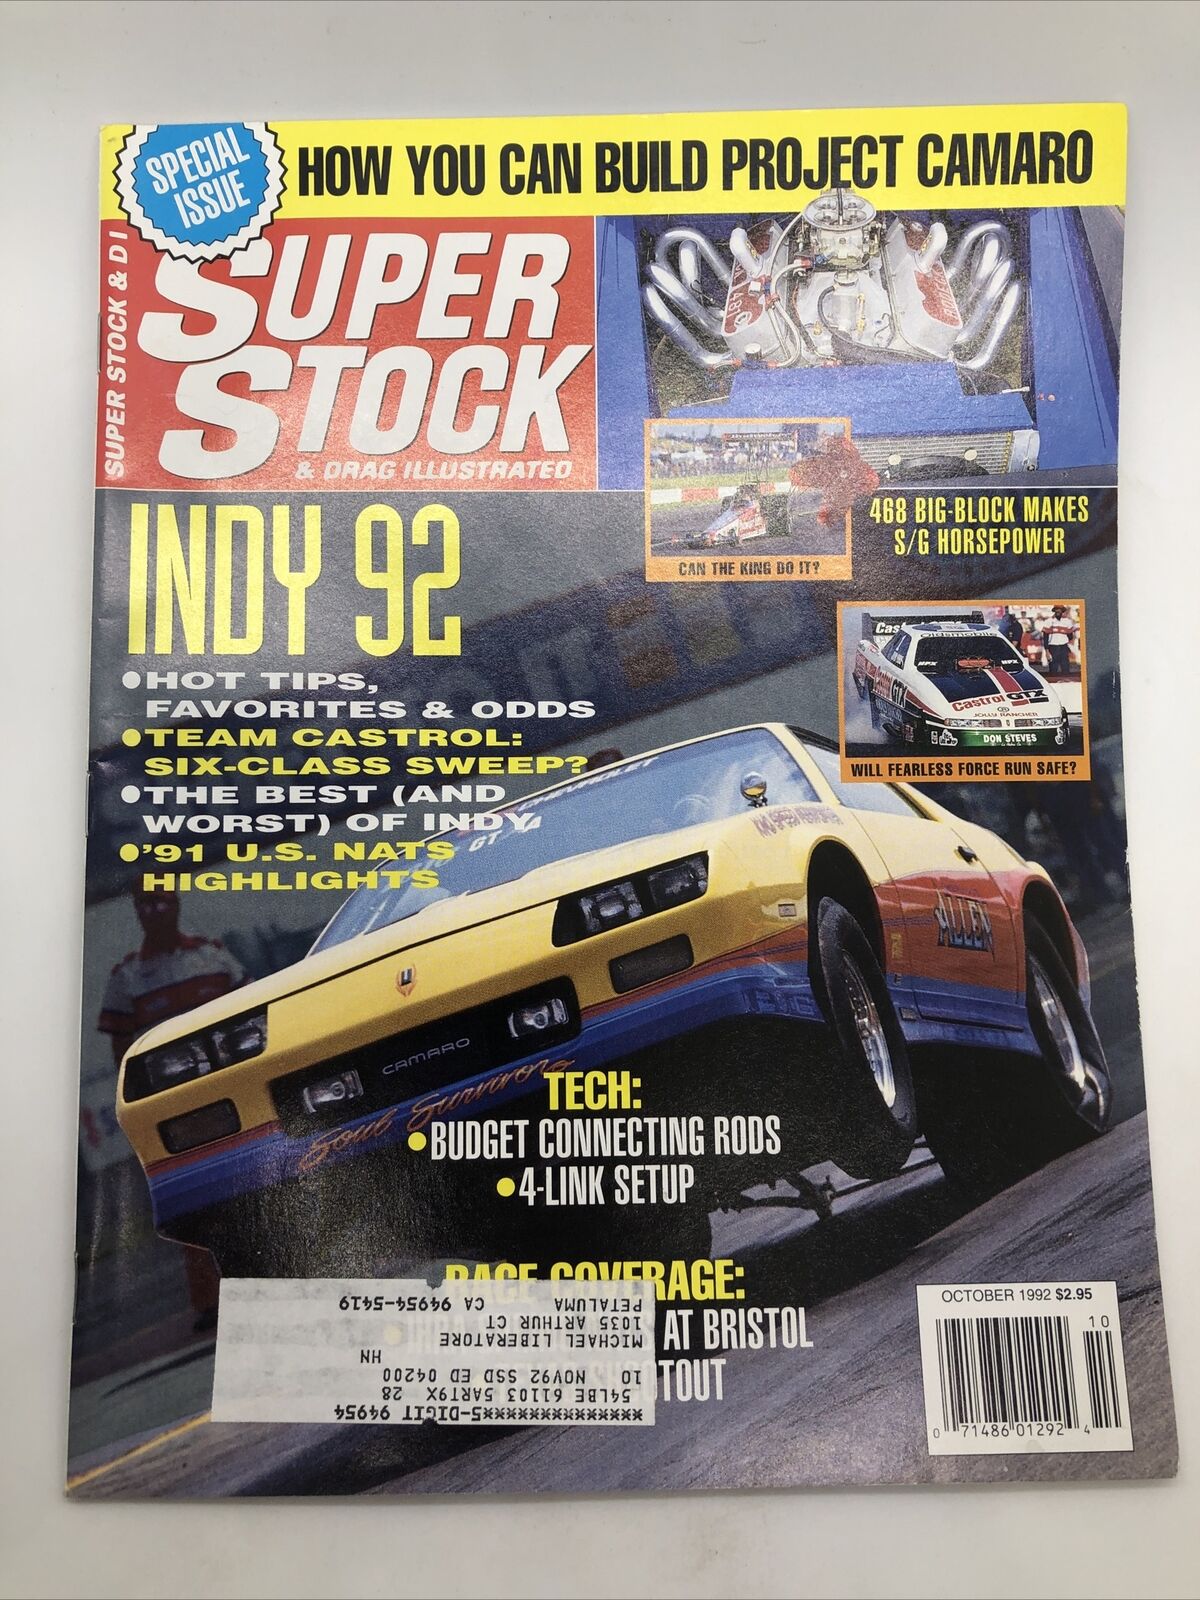 Super Stock & Drag Illustrated Magazine October 1992 Indy 92 / How Tips 